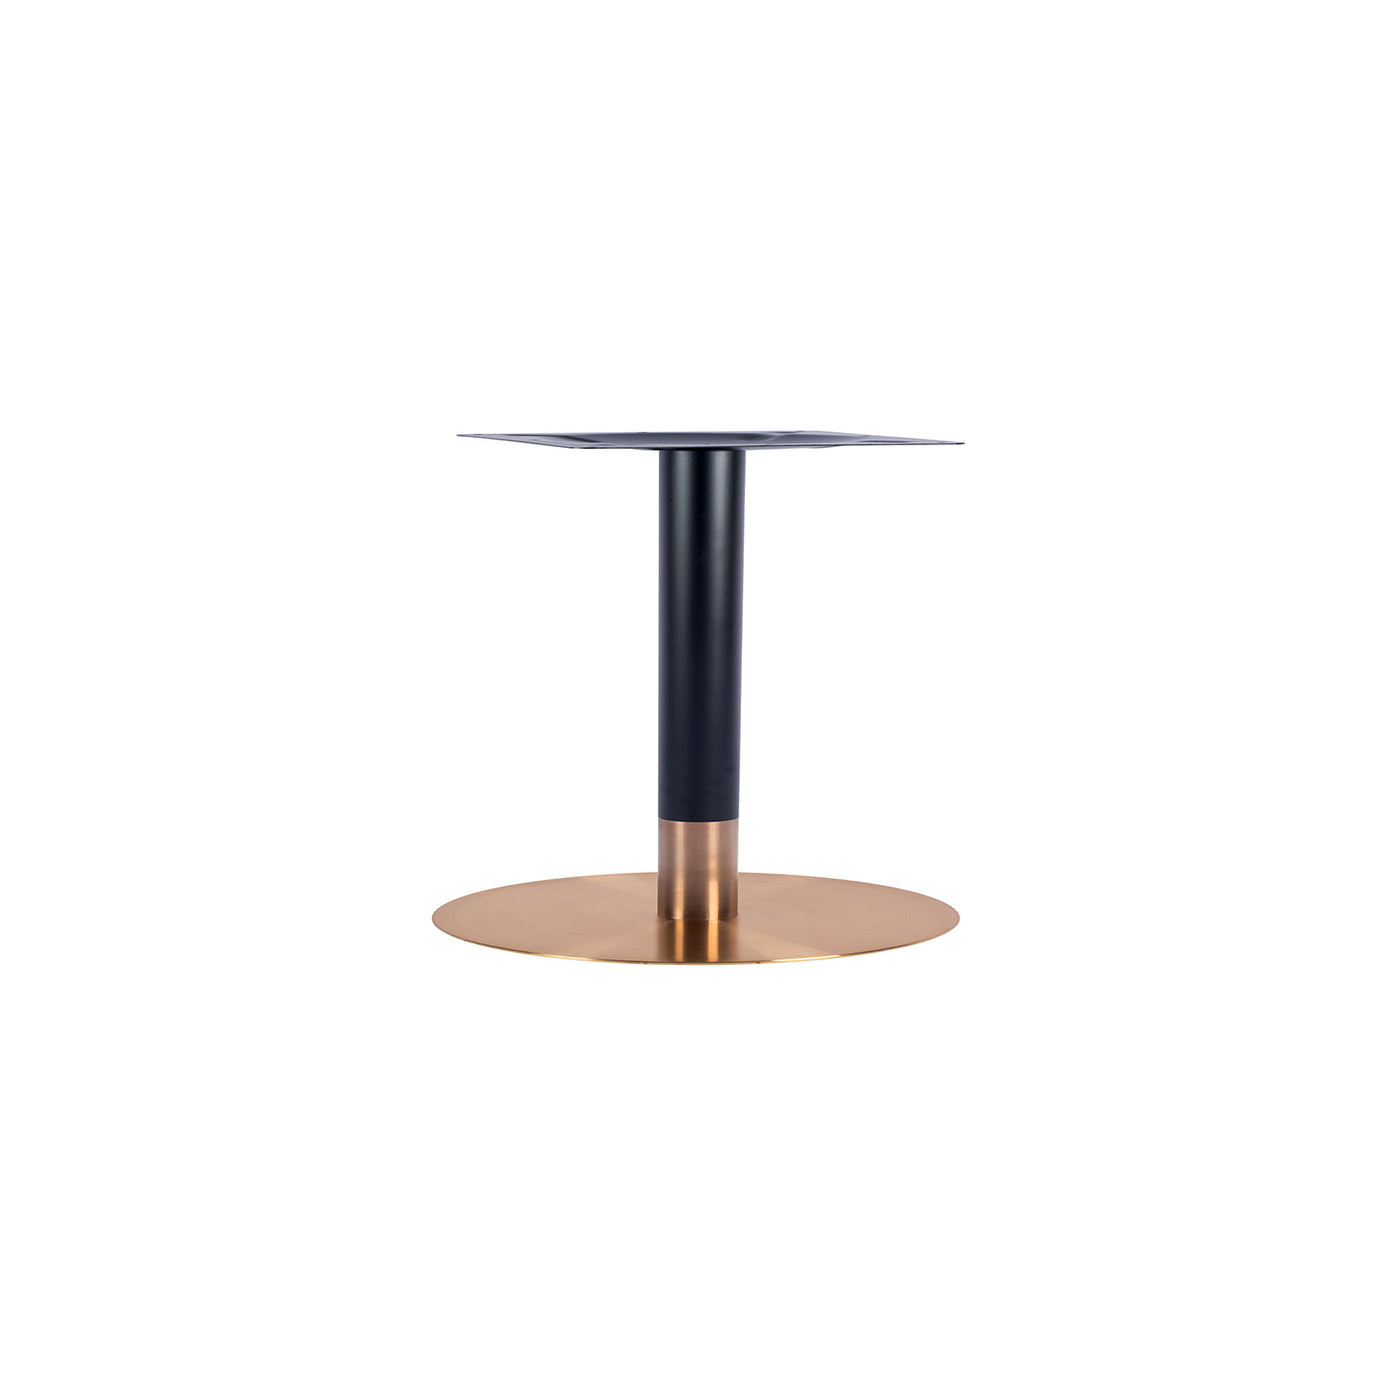 Ava Small Round Table Base - Rose-Gold/Black